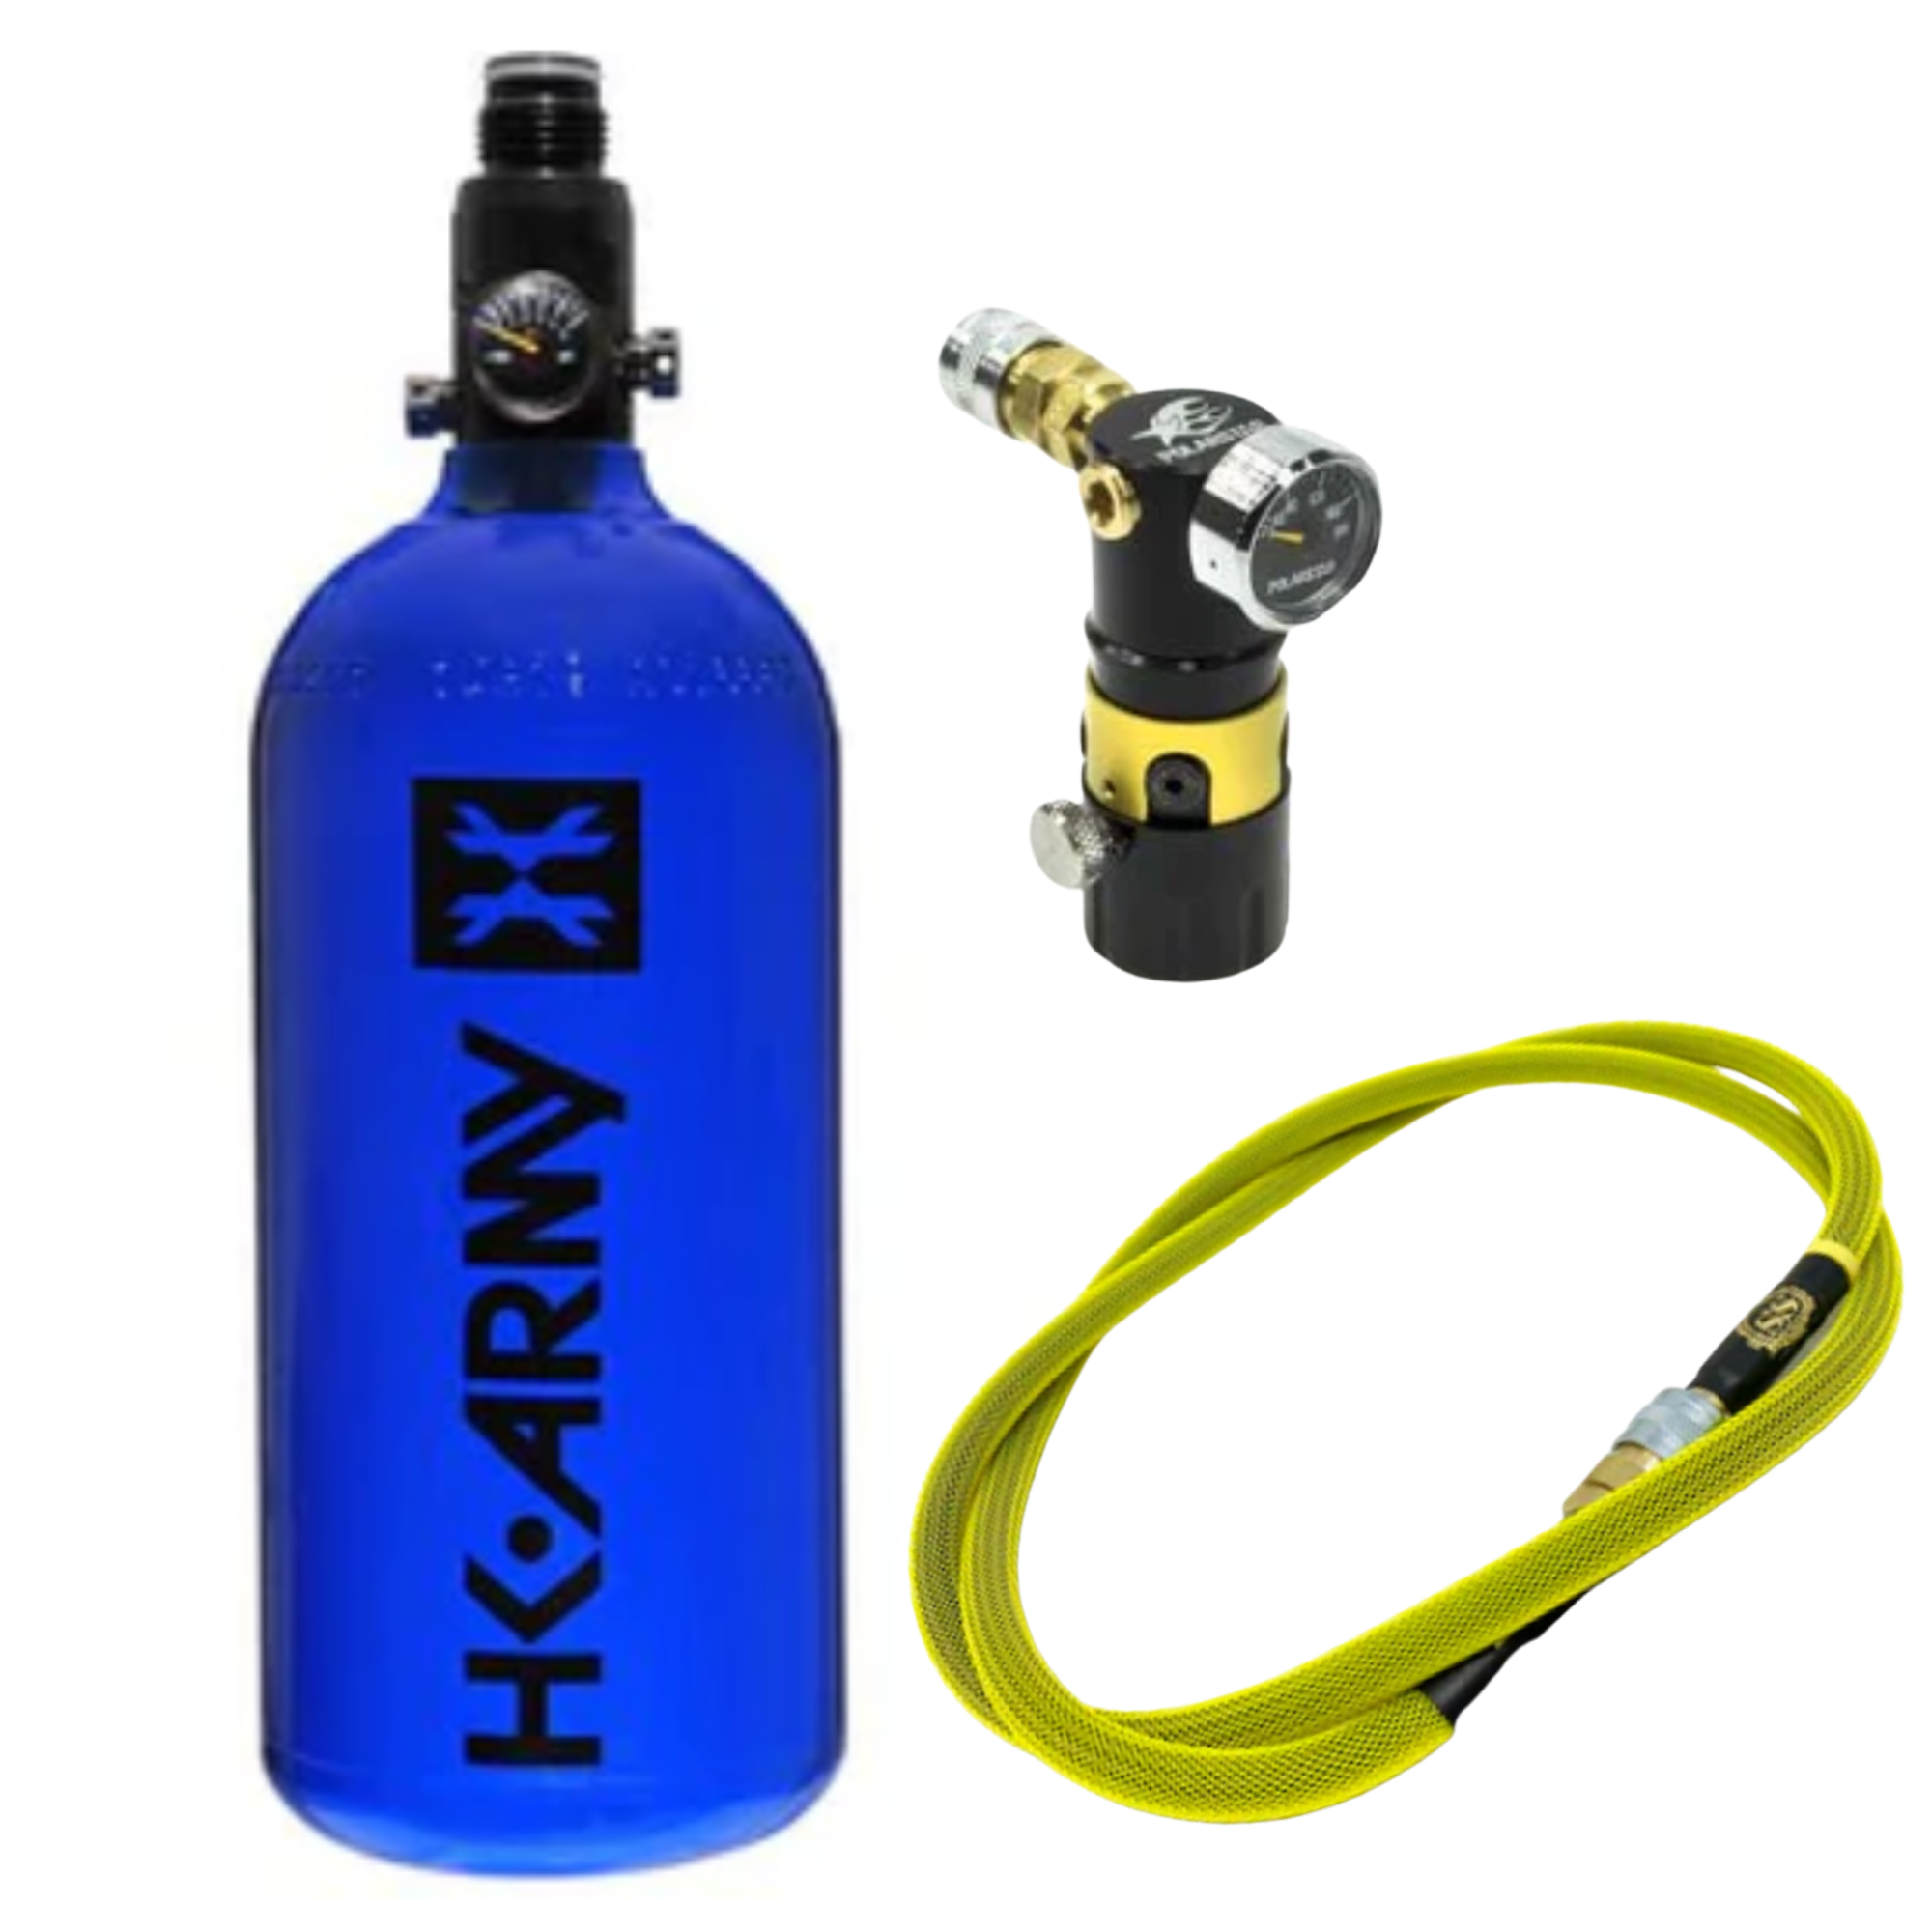 SS Airsoft HPA System Bundle MANY COLORS AVAILABLE (Tank, Line, Regulator) - ssairsoft